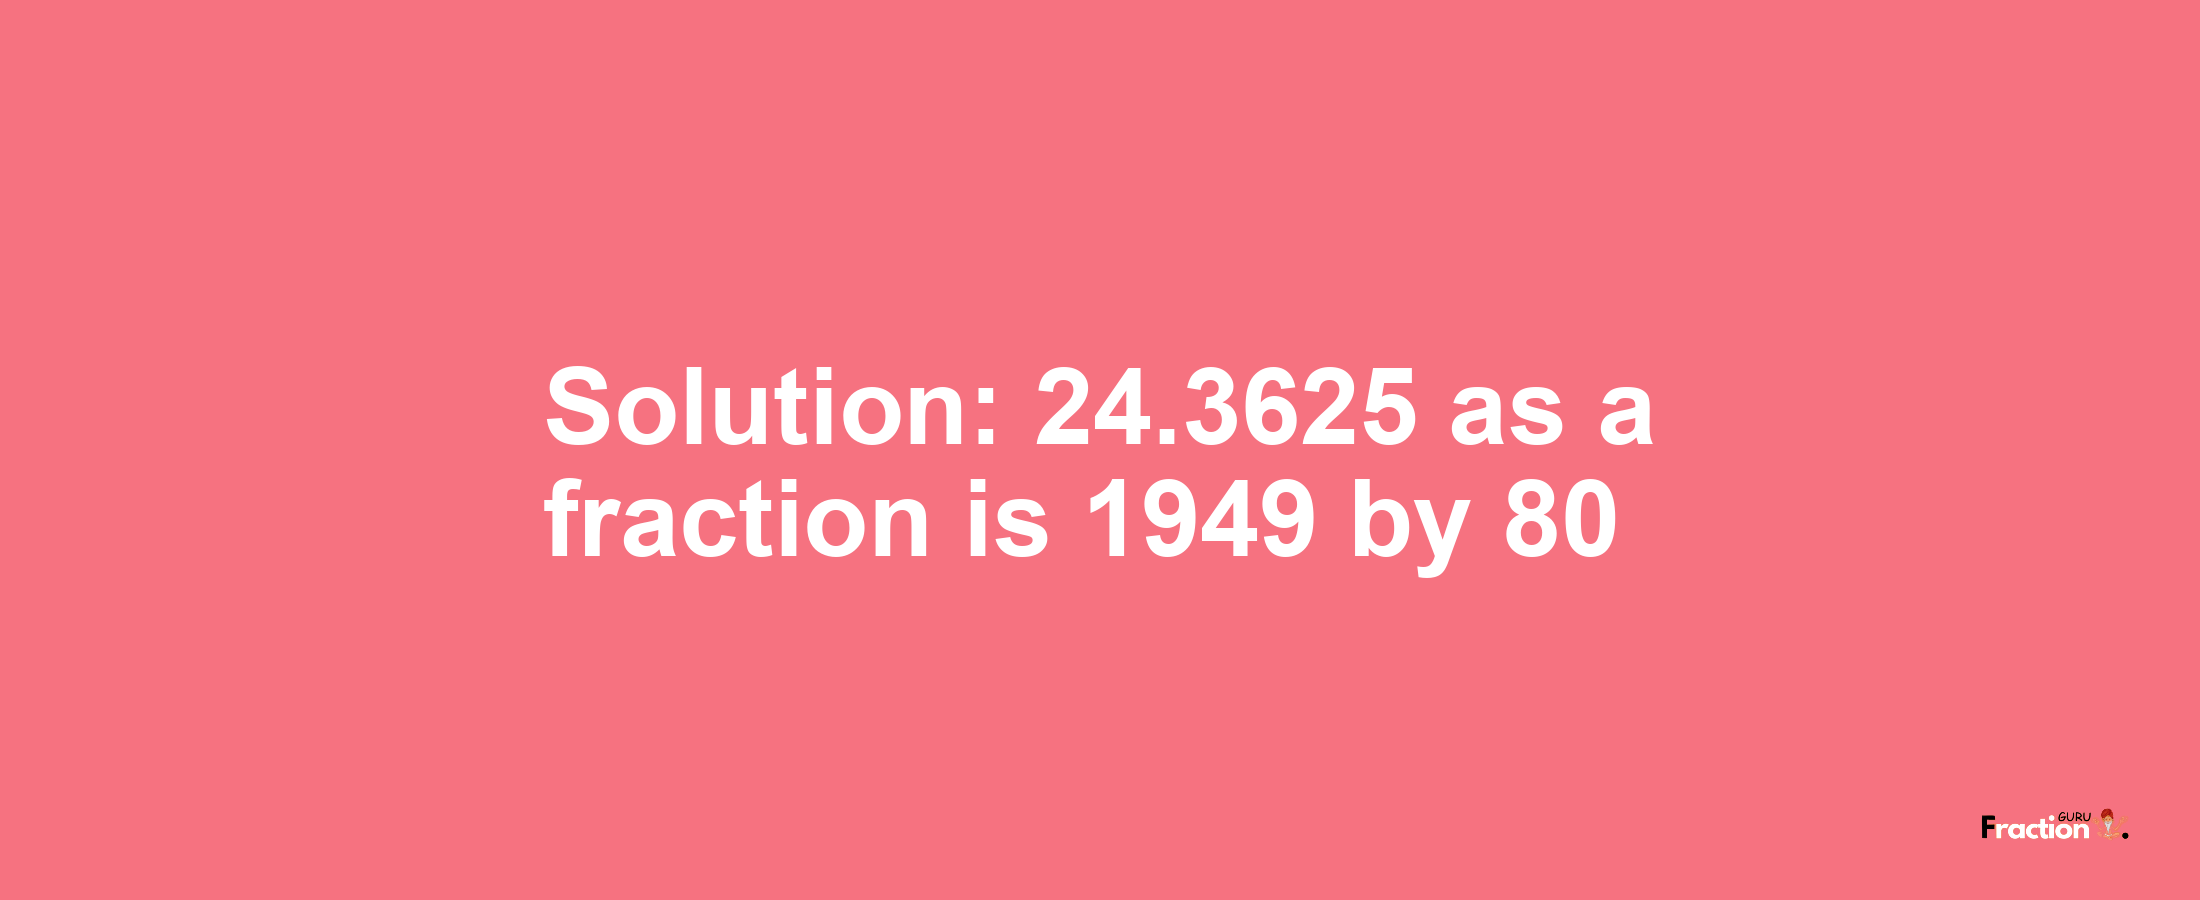 Solution:24.3625 as a fraction is 1949/80